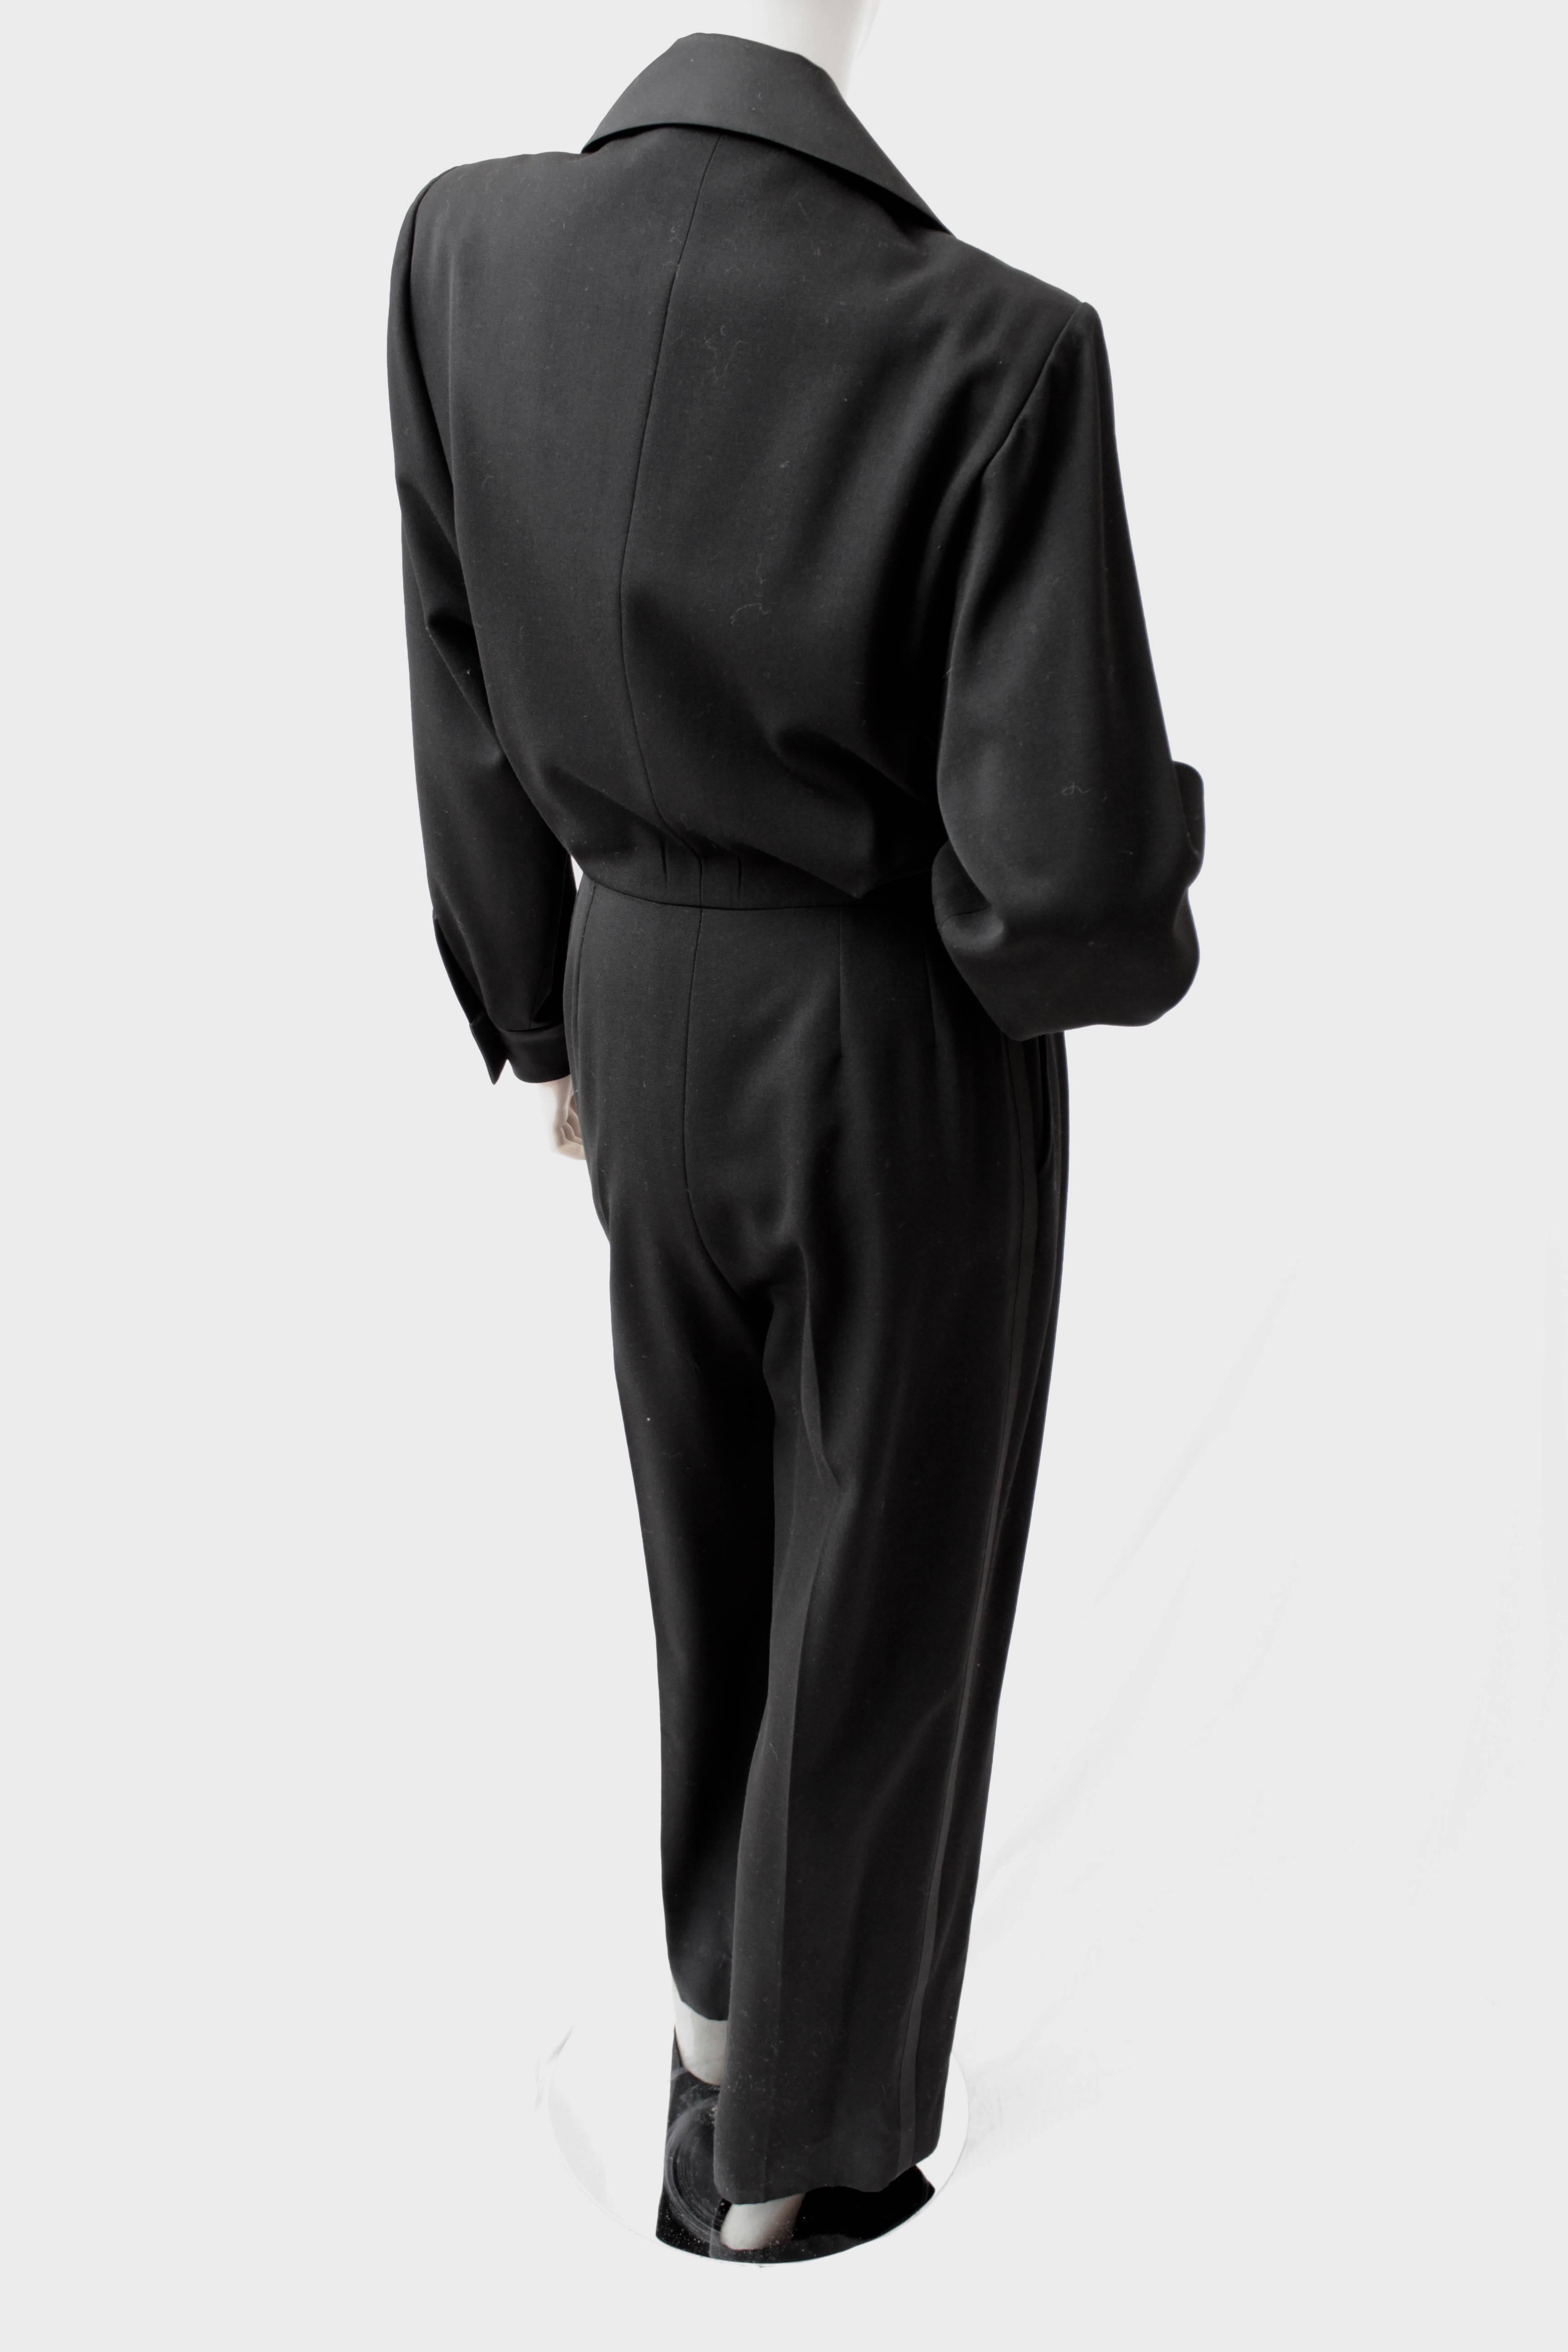 This incredibly chic black jumpsuit was made by Yves Saint Laurent Rive Gauche, most likely in the early 1990s.  Made from wool with silk satin trim, it features YSL's iconic Le Smoking theme in a very sleek jumpsuit with low cut neckline. 